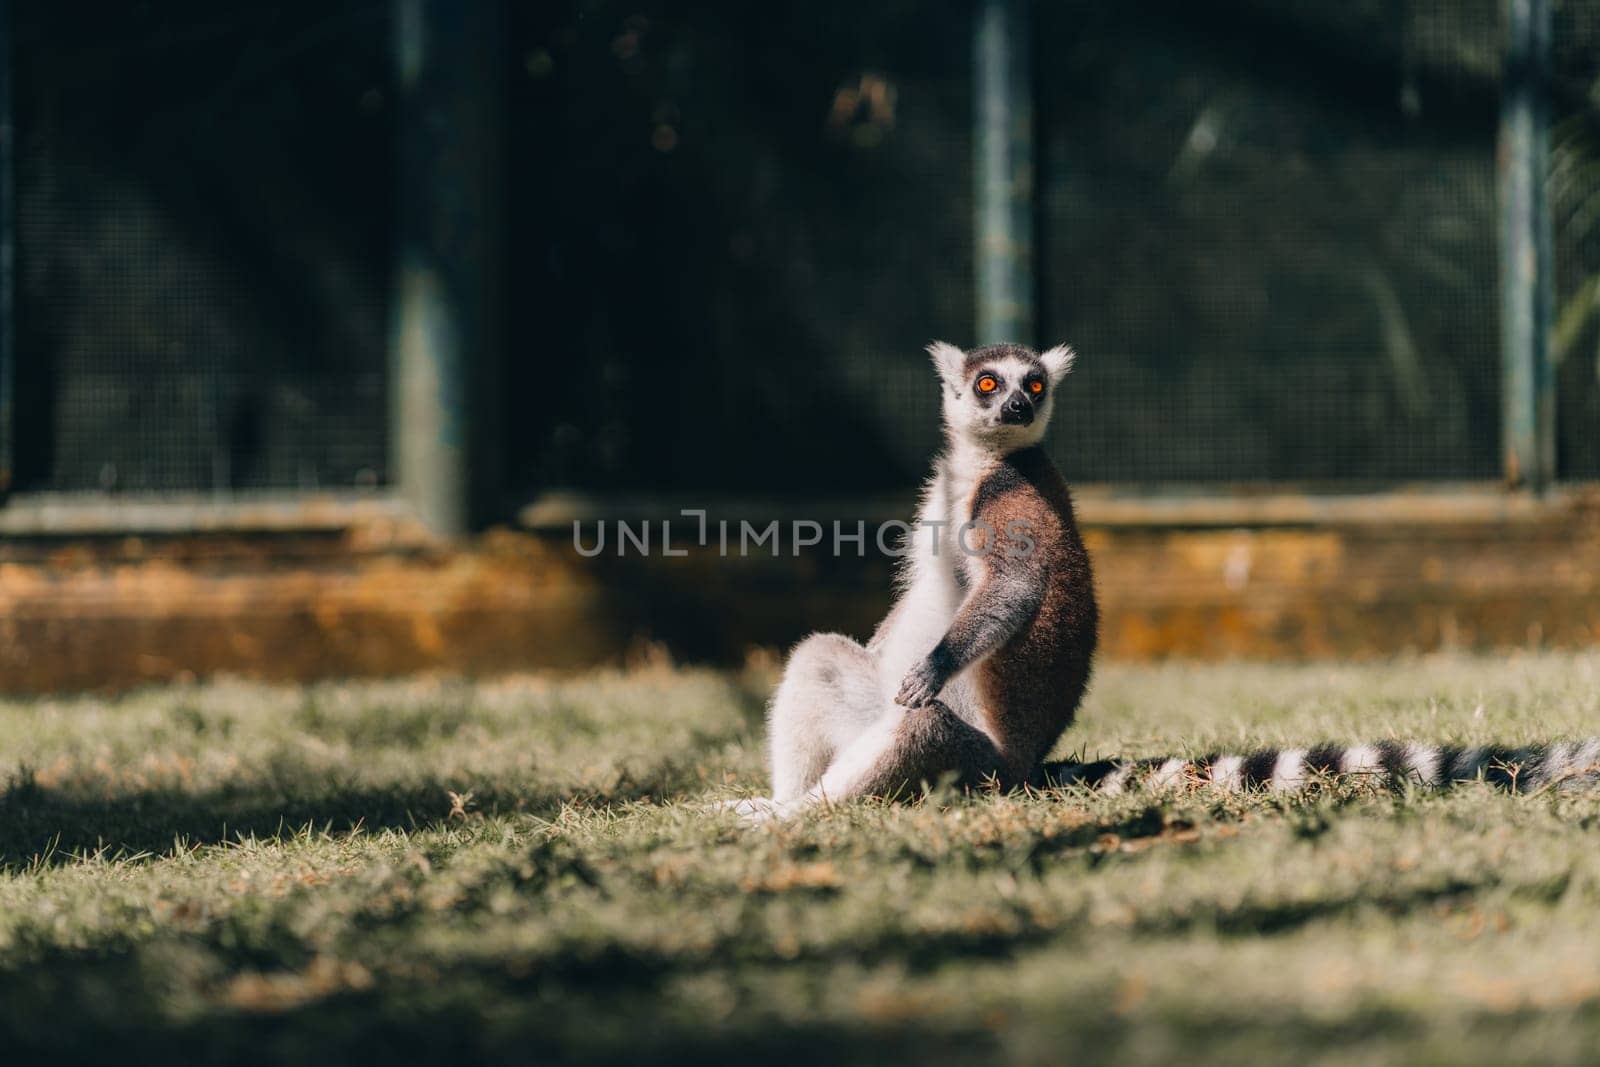 Close up shot of sitting ring tailed lemur on grass. Cute lemur in lookout position watching around